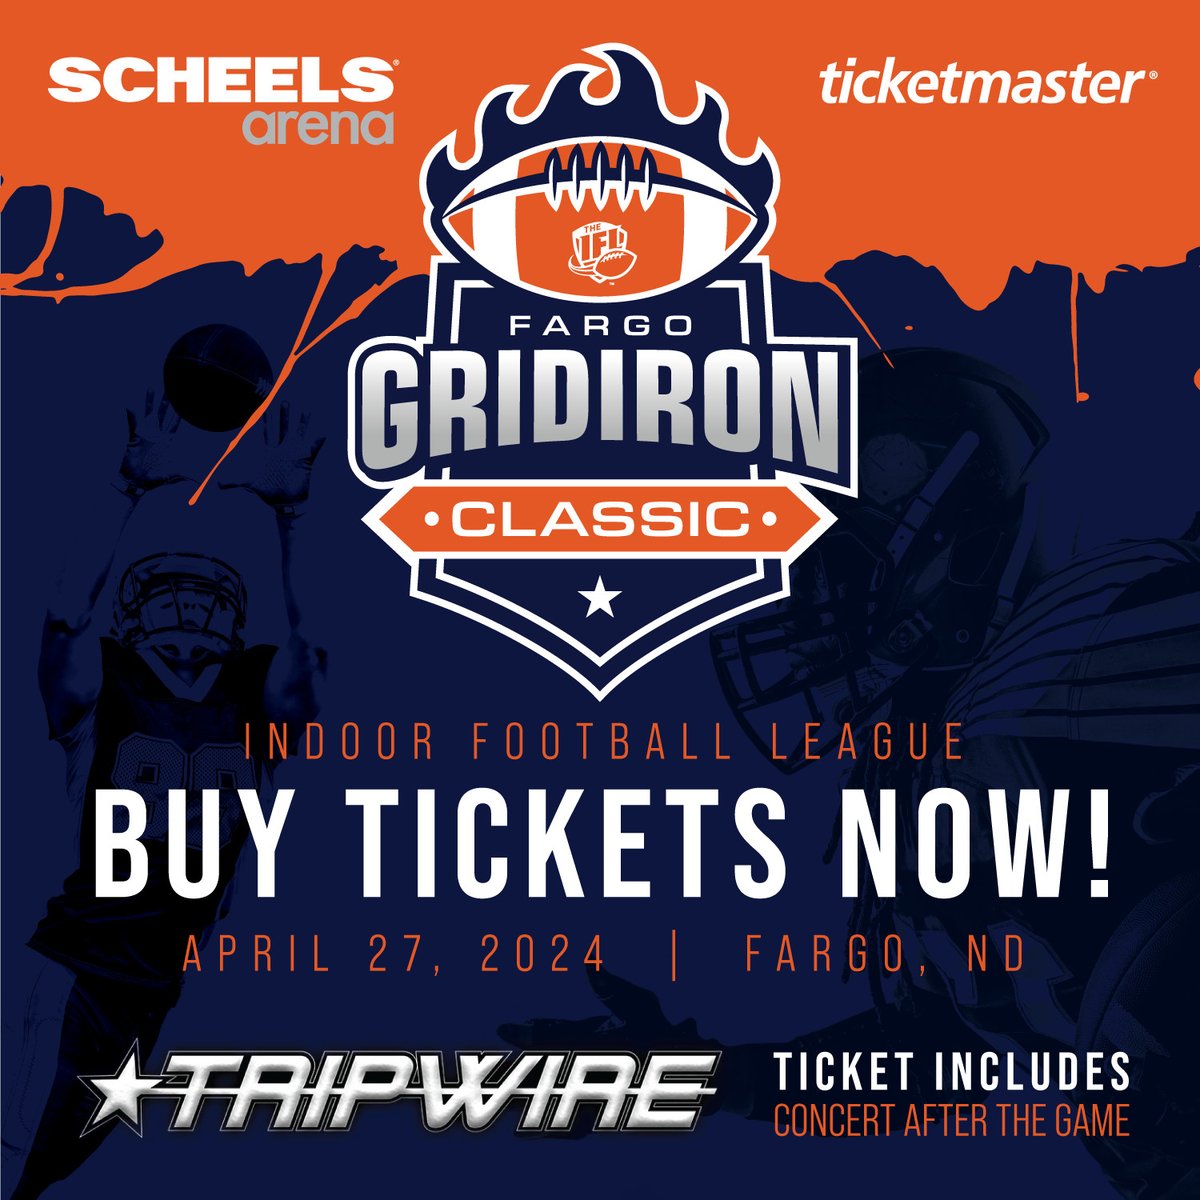 🎸🏈Experience the thrill of football followed by the excitement of live music!  Grab your tickets now! 🎟️ 

📺 Watch the action in person, or catch it on BEK TV!

#BEKTVplus #BEKTV #Gridiron #IFL #Football #Scheels #Tripwire #IndoorFootball